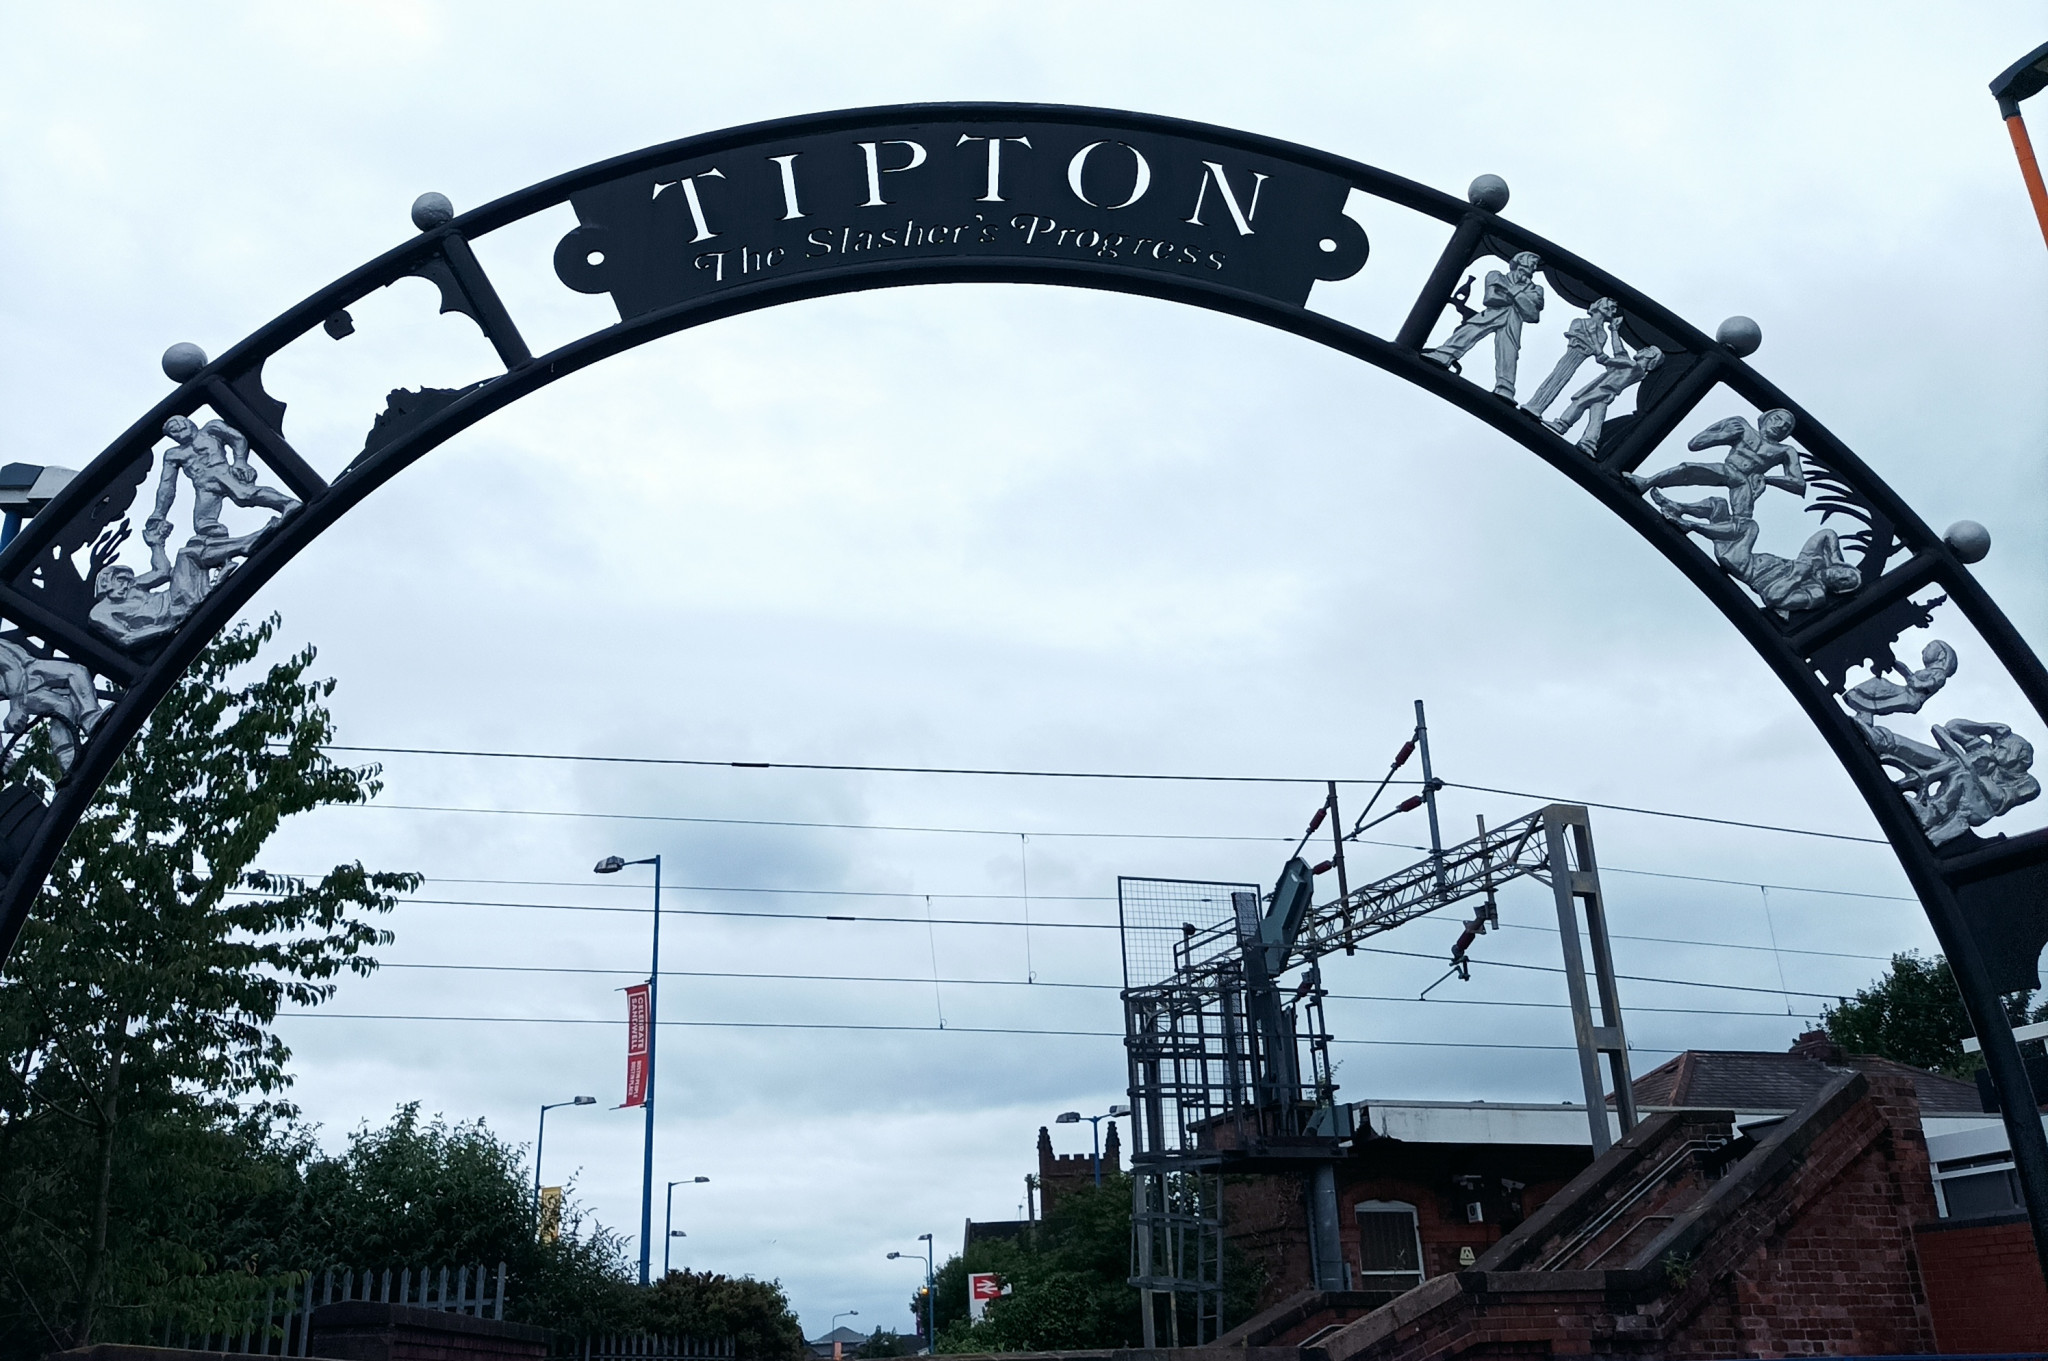 The archway at Tipton railway station depicting the career of William Perry ©ITG